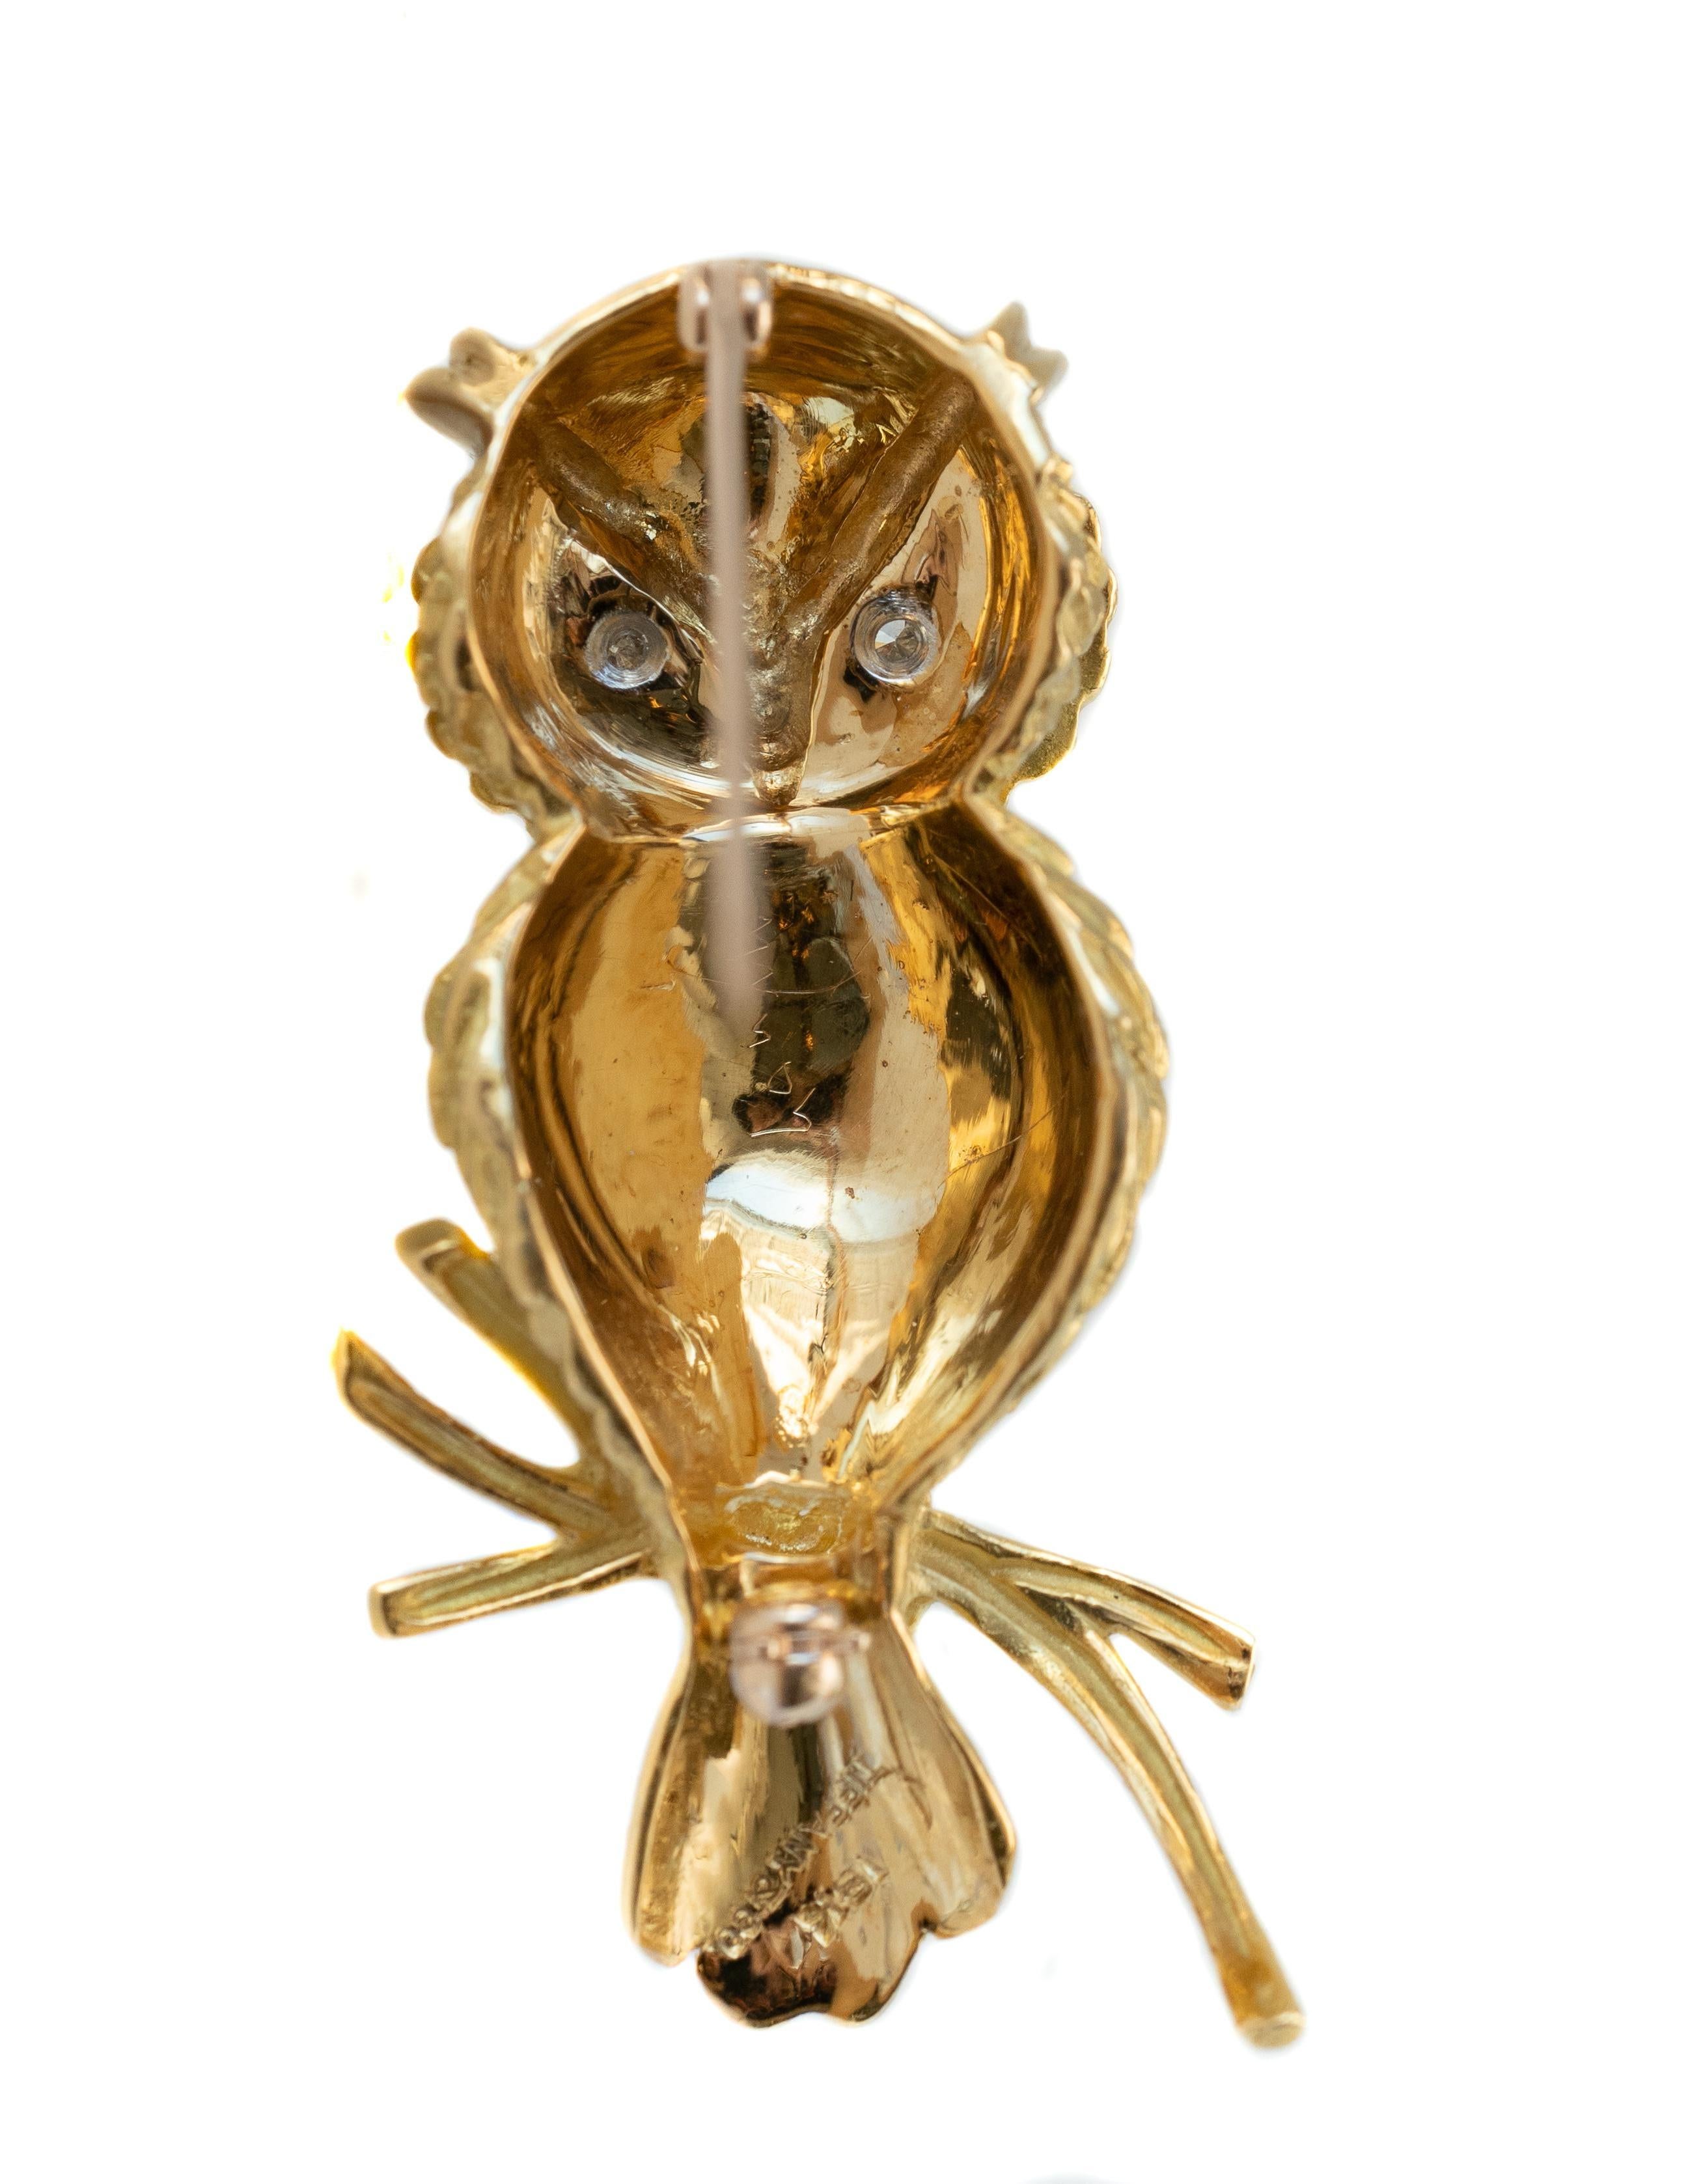 Tiffany and Co. Gold Owl Brooch - 18 karat Yellow Gold, Diamonds

Features:
18 karat Yellow Gold
2 Round Brilliant Diamond Eyes
Feather Textured Gold Wings, Tail and Face
Owl is perched on a polished gold Branch
4.5 x 2.5 x 1.0 centimeters 
Prong